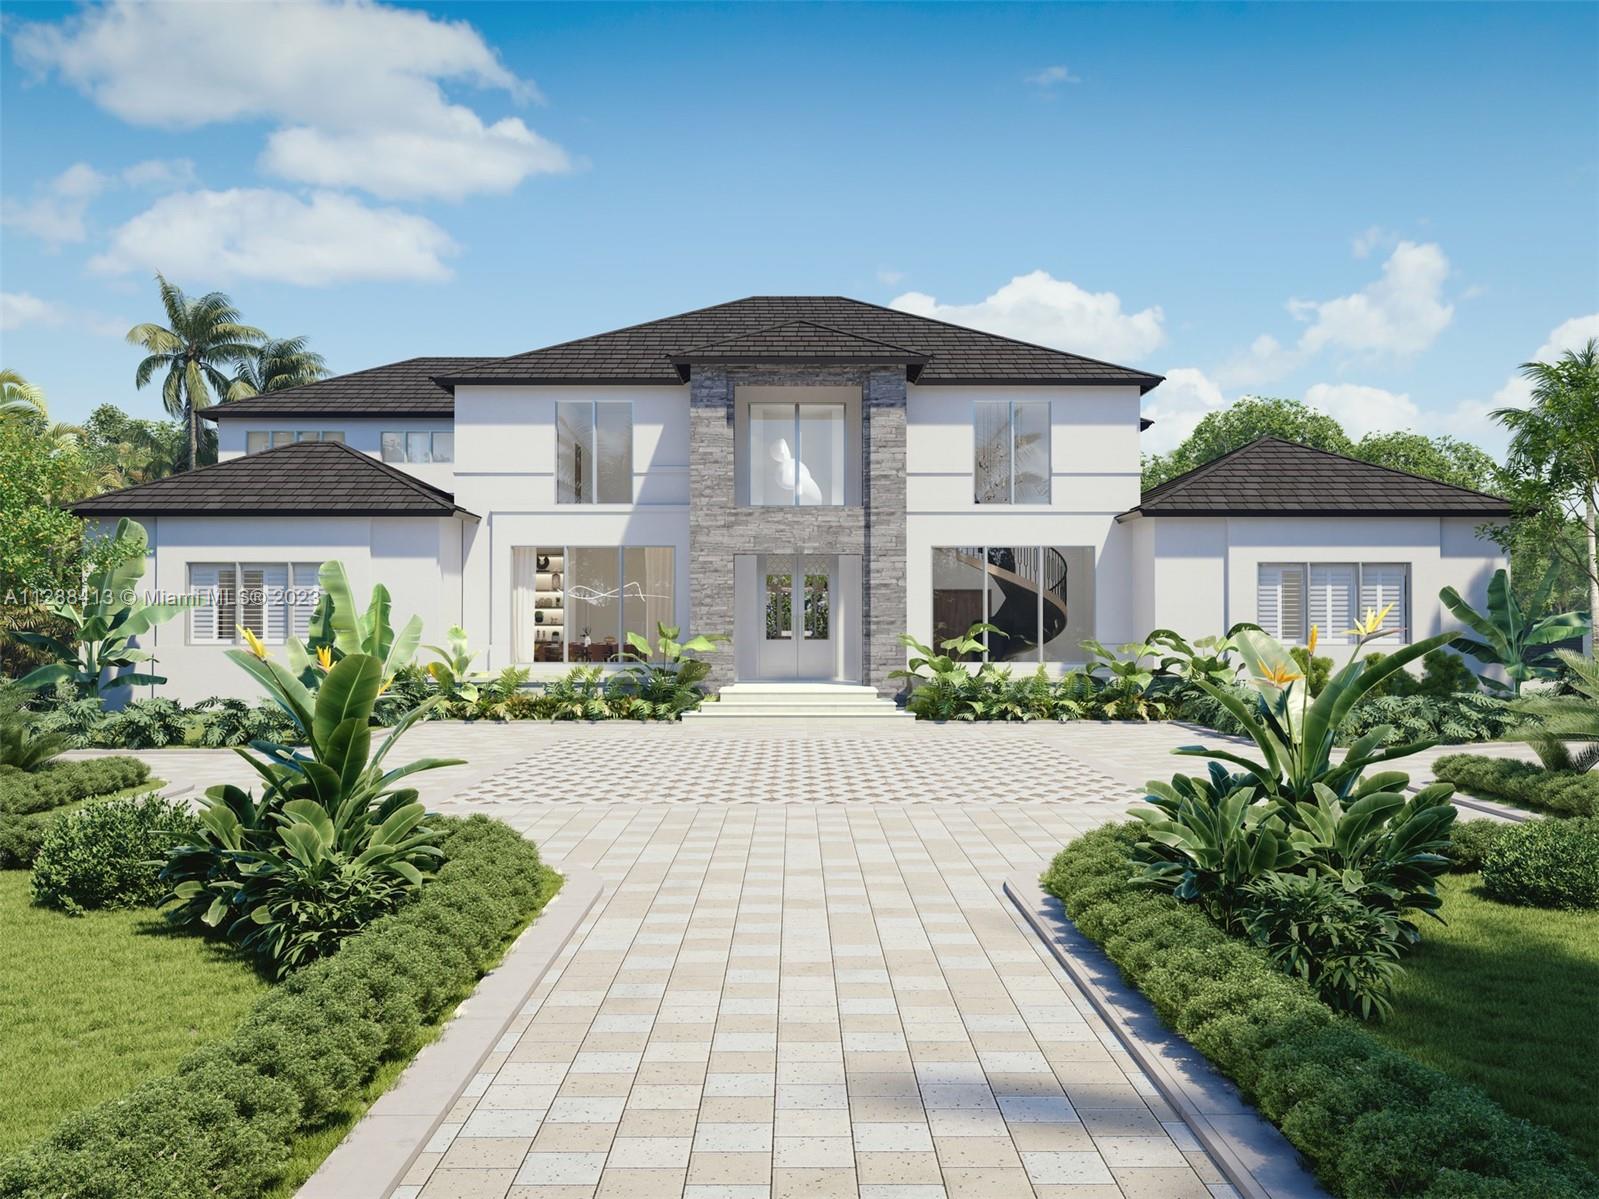 Extraordinary 2024 Brand-new Contemporary-Style Estate located in North Pinecrest. This magnificent new build sits on an acre of land & surrounded by lush landscaping. With over 11,000sf in living space, this home is perfect for entertaining at a grand scale. Amazing pre-construction opportunity for the discerning buyer who wants to customize and choose all their finishes. Discover a unique floorplan with an infusion of rich woods & floor to ceiling glass. Expansive living areas & bonus rooms such as home theatre, den/office, and separate guest house. Seamlessly transition from indoor to outdoor living with connecting pergola, summer kitchen, covered terrace, gazebo, fire pit lounge area, swimming pool/spa, & 4-car gar that can be expanded to accommodate 8 cars. Excellent schools nearby.